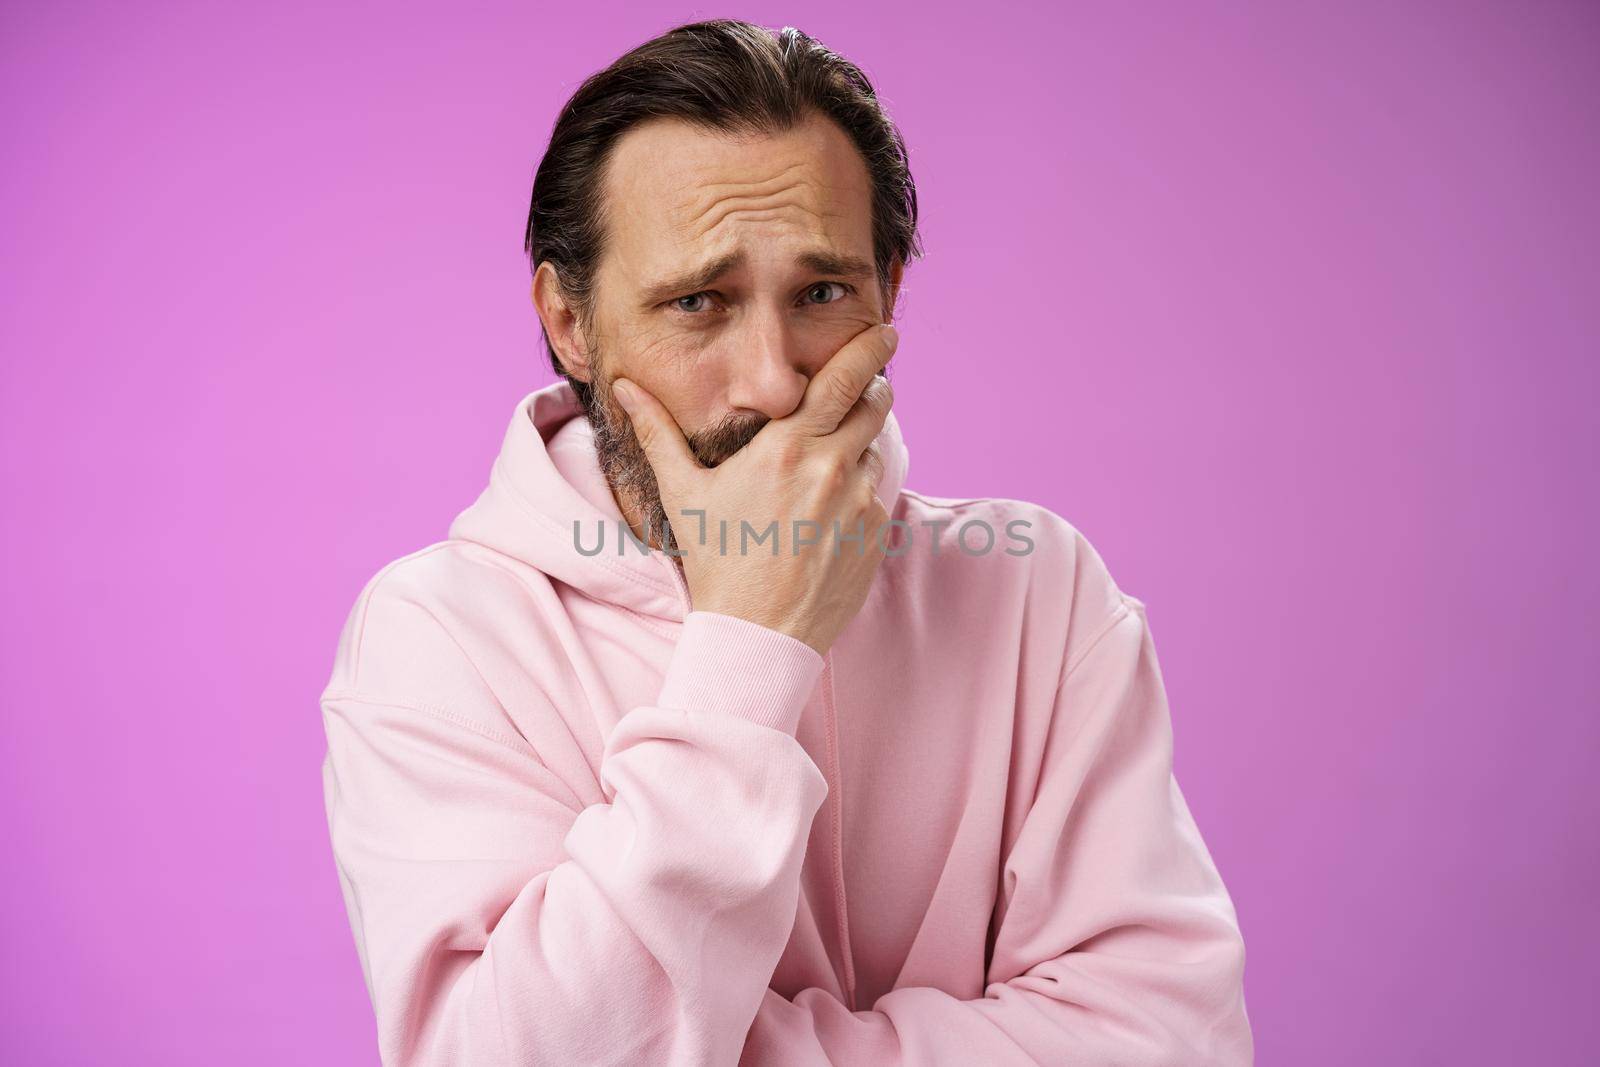 Shocked upset handsome mature bearded man hear terrible news griefing suffer sorrow express empathy gasping hold hand mouth reacting lose cringing crying cannot control emotions, purple background.